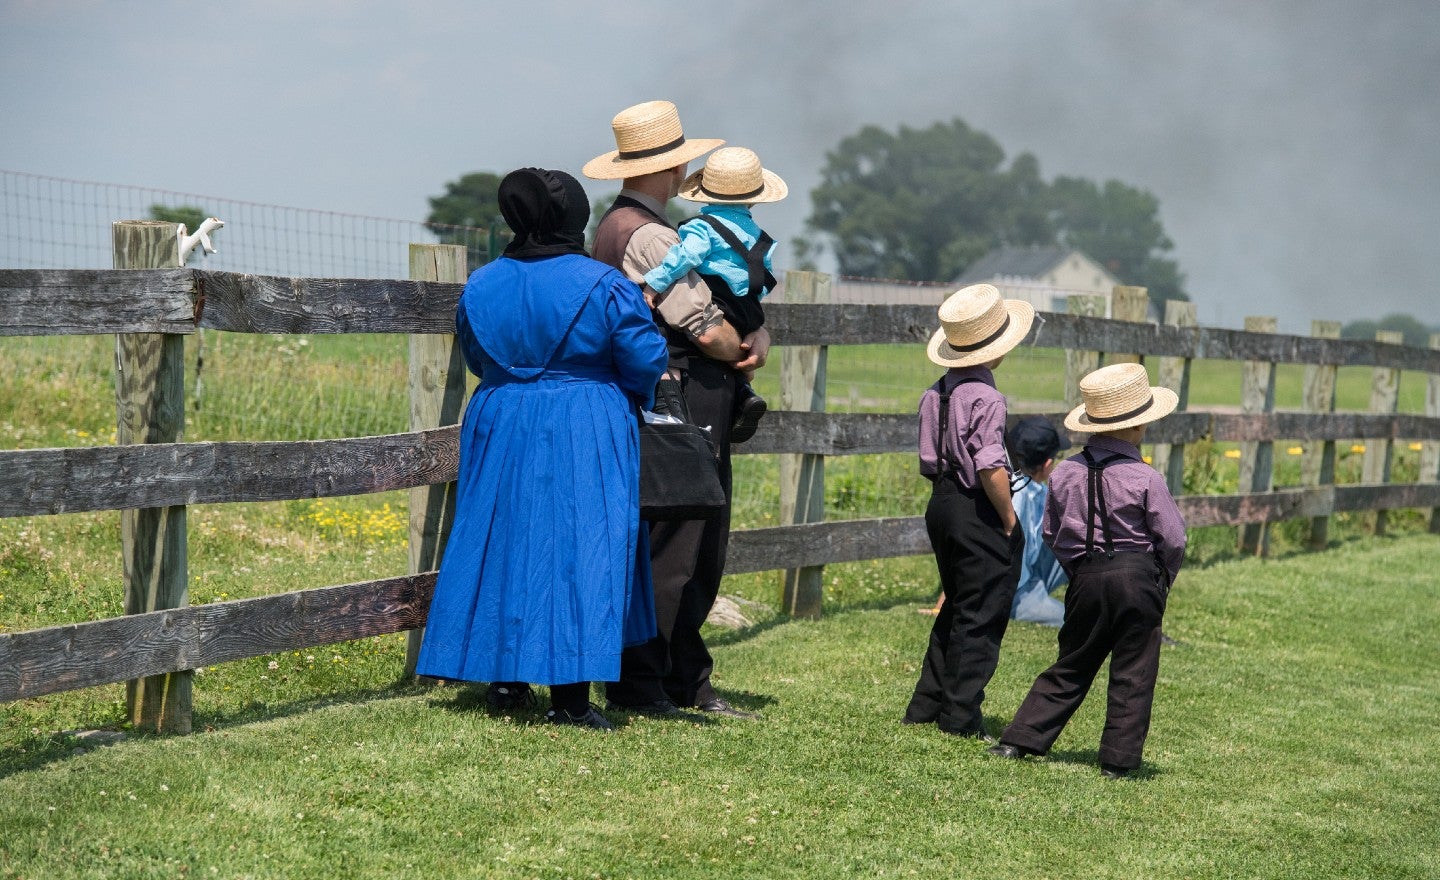 It can be difficult to get a religious exemption for vaccination decisions in the case of Amish shows